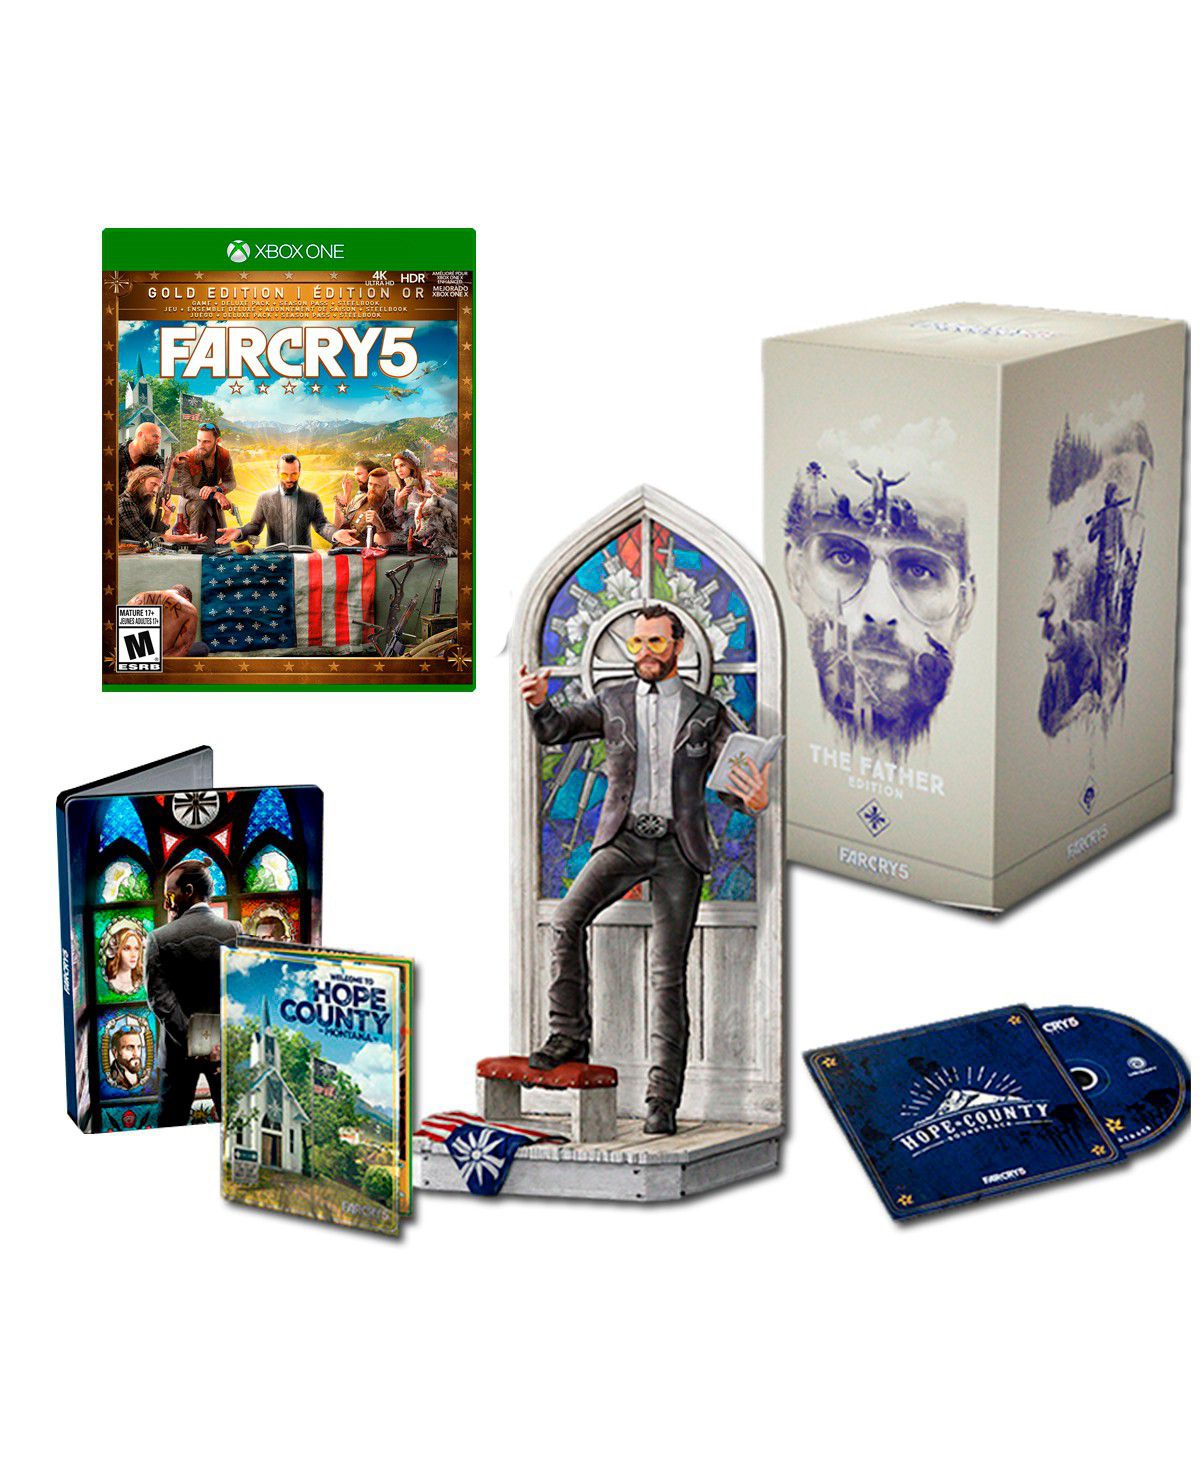 Far Cry 5 Gold Edition PS5